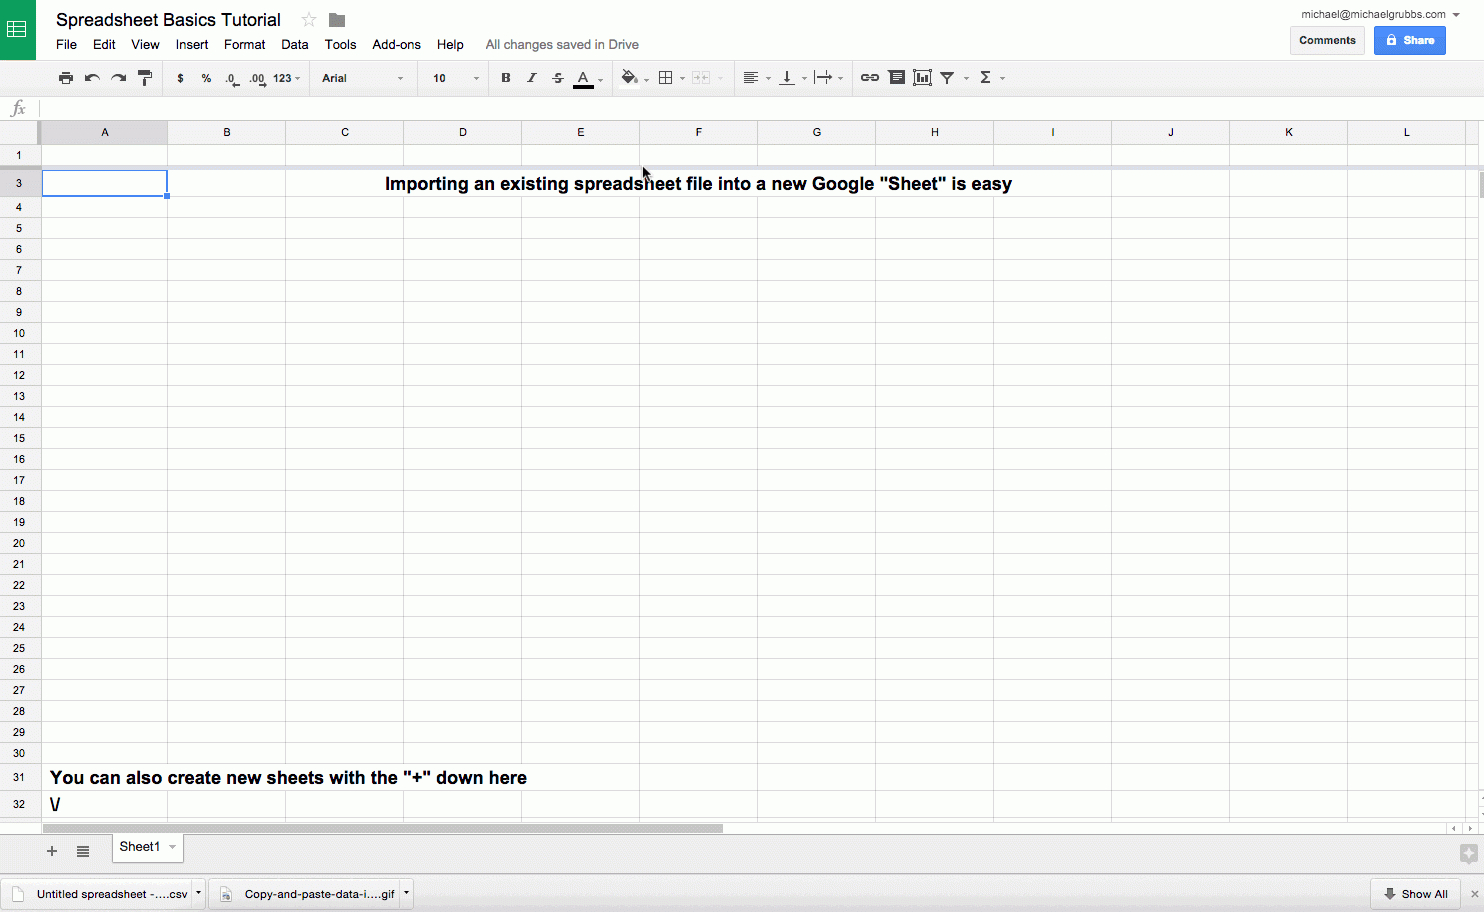 Google Excel Spreadsheet Templates In Google Sheets 101: The Beginner's Guide To Online Spreadsheets  The